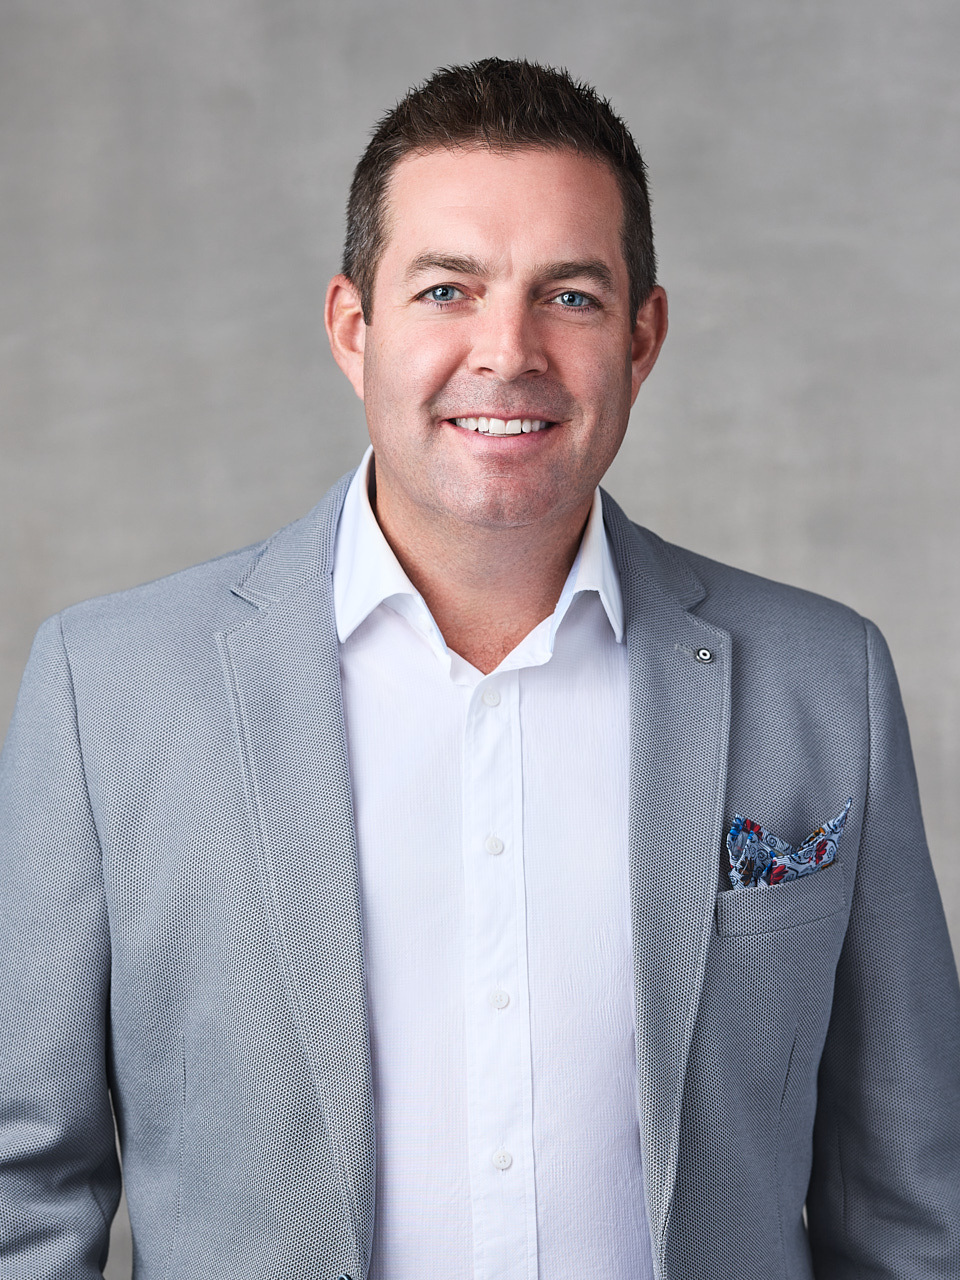 Professional headshot of a Mac's II Agencies team member, dressed in business attire with a poised and confident stance against a clean, white background in Metro Vancouver.